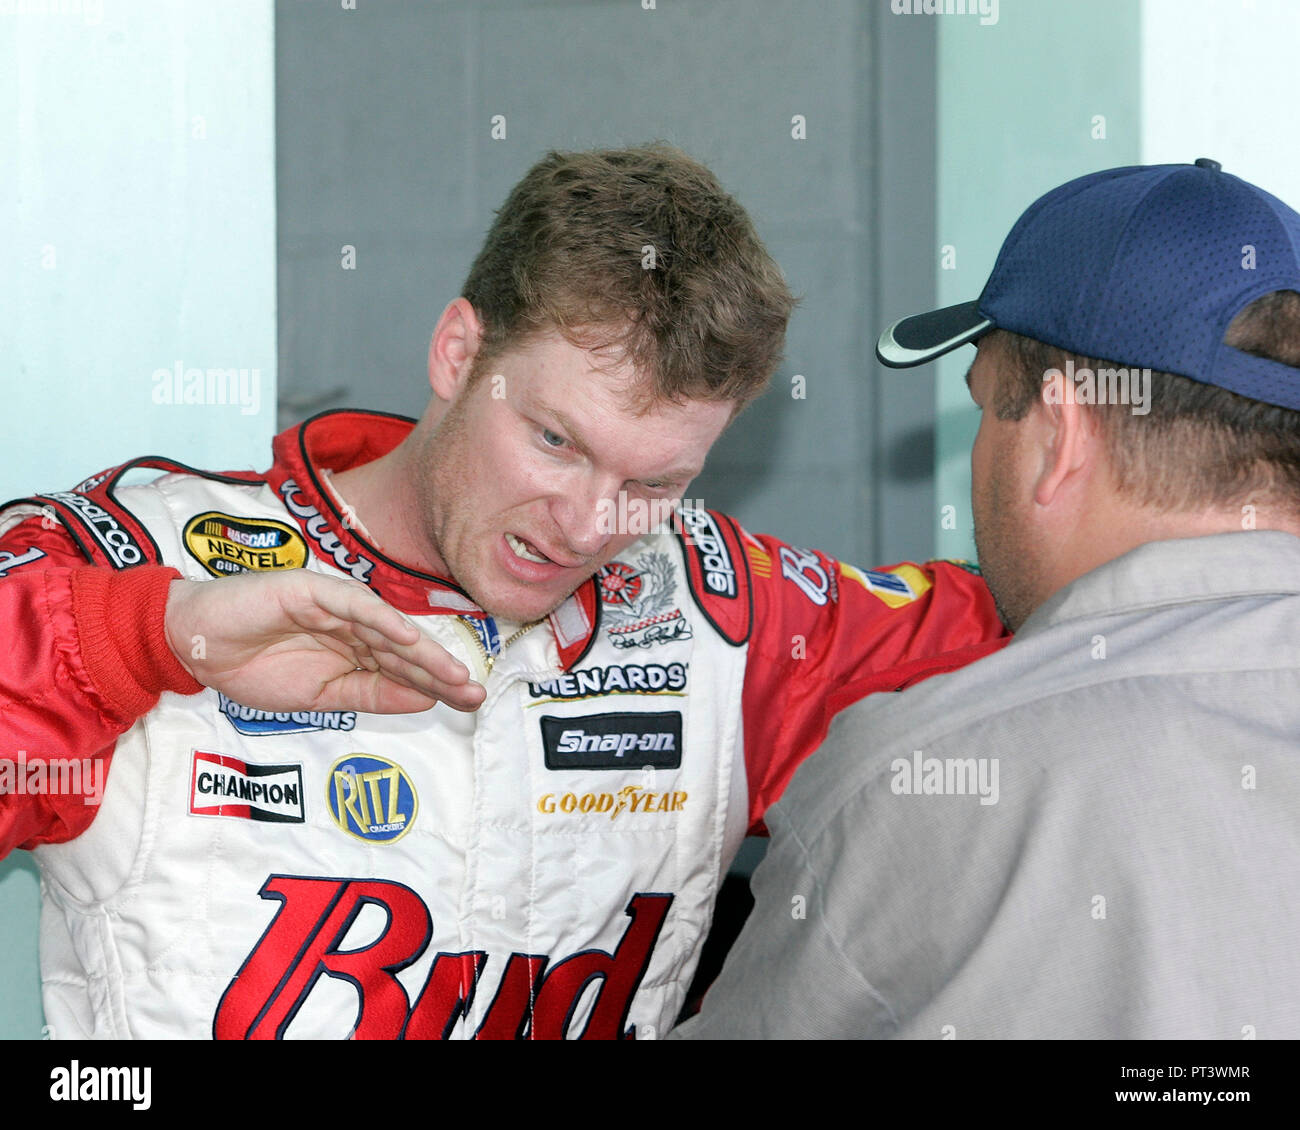 NASCAR Nextel Cup driver Dale Earnhardt Jr. prepares for a testing session at the Homestead-Miami Speedway, in Homestead,  Florida, on November 9, 2005. Stock Photo